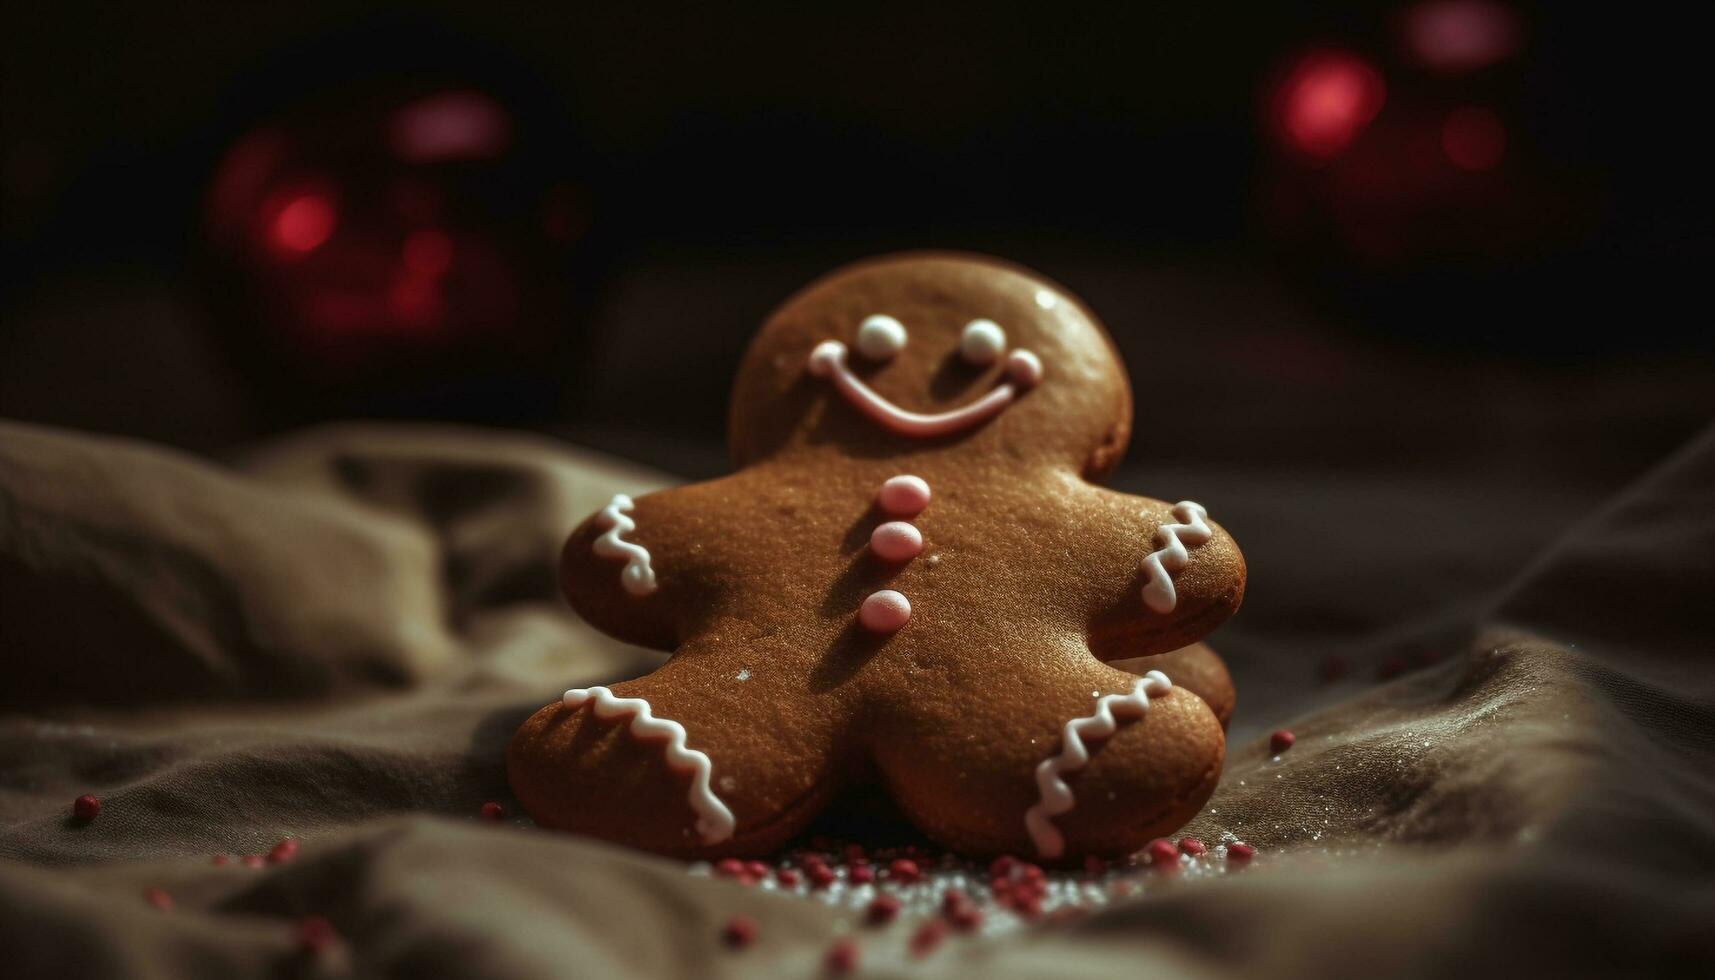 Homemade gingerbread cookies bring winter cheer and sweet indulgence generated by AI photo